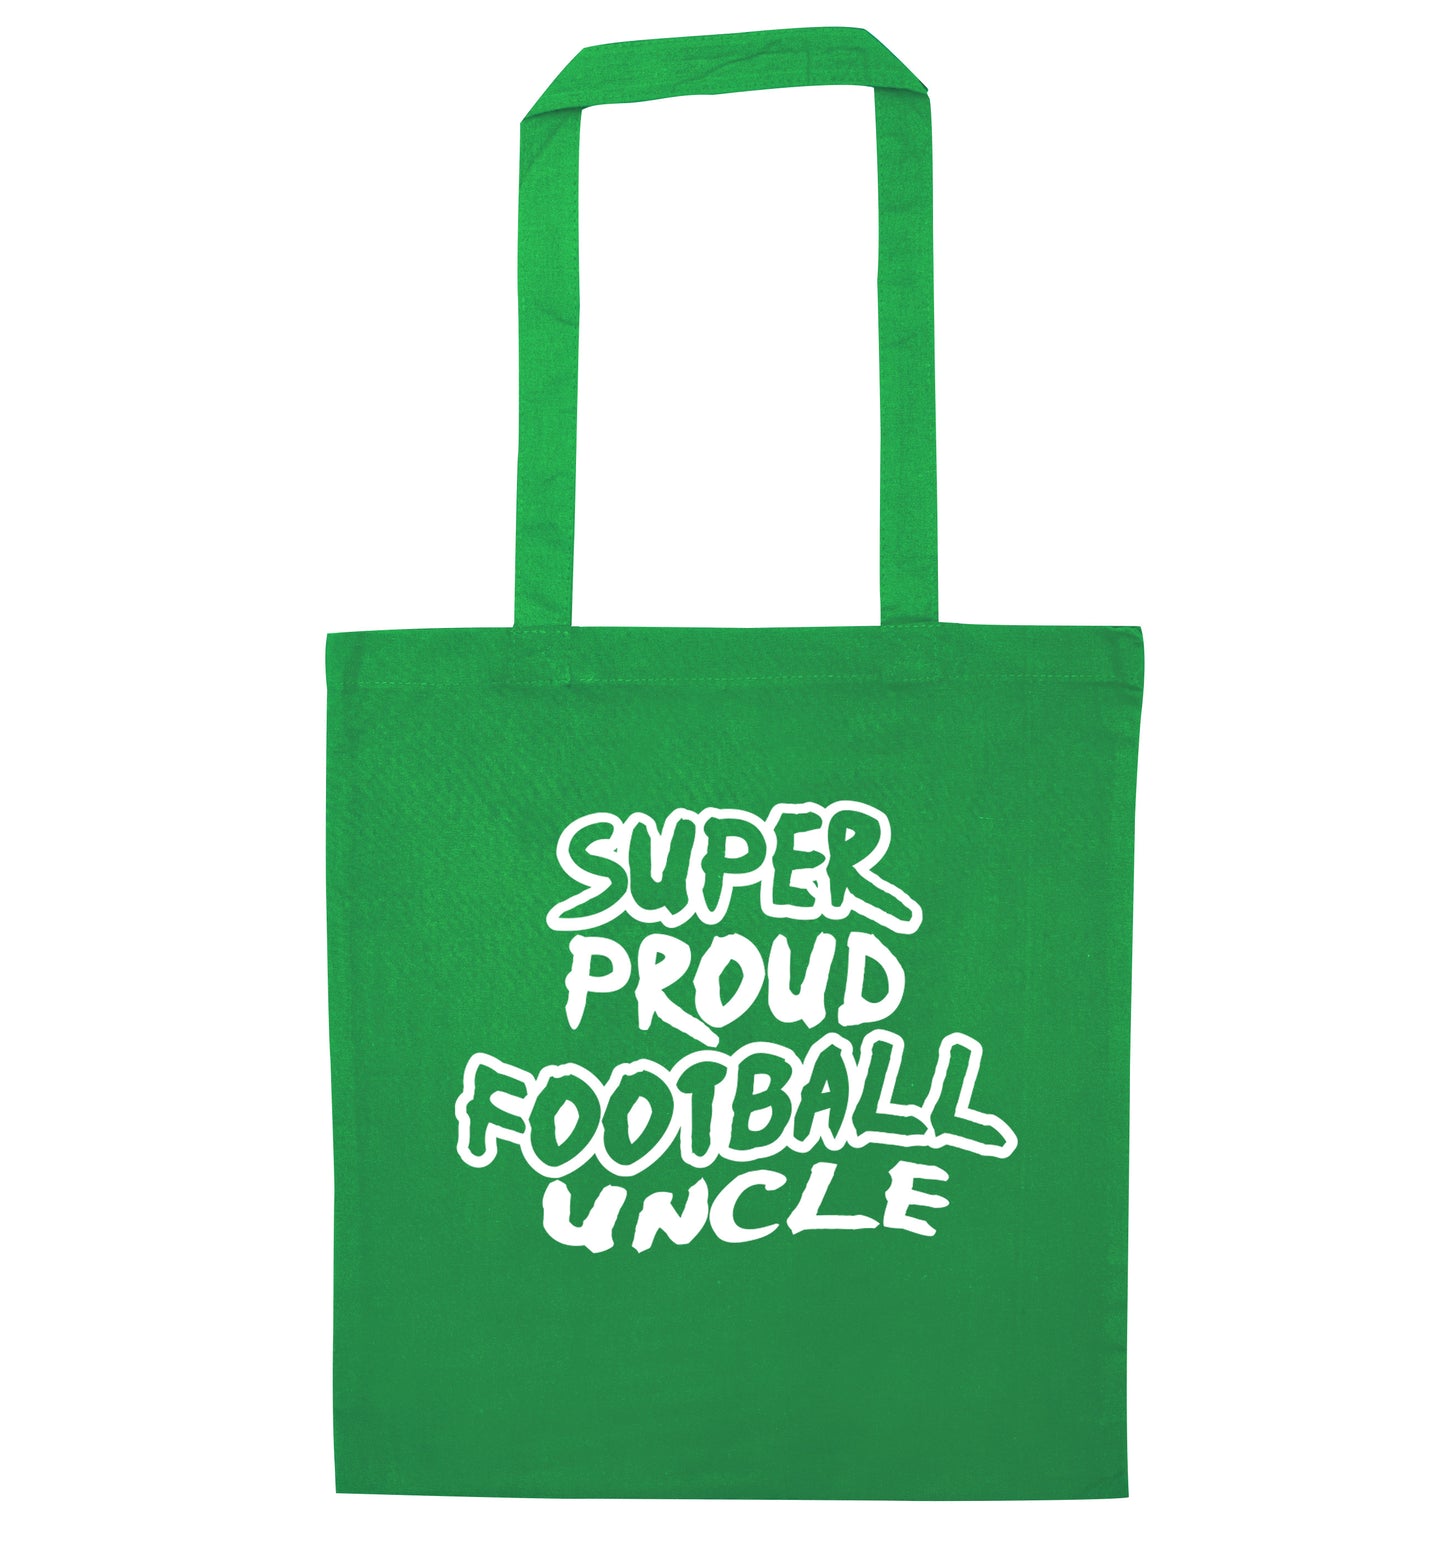 Super proud football uncle green tote bag